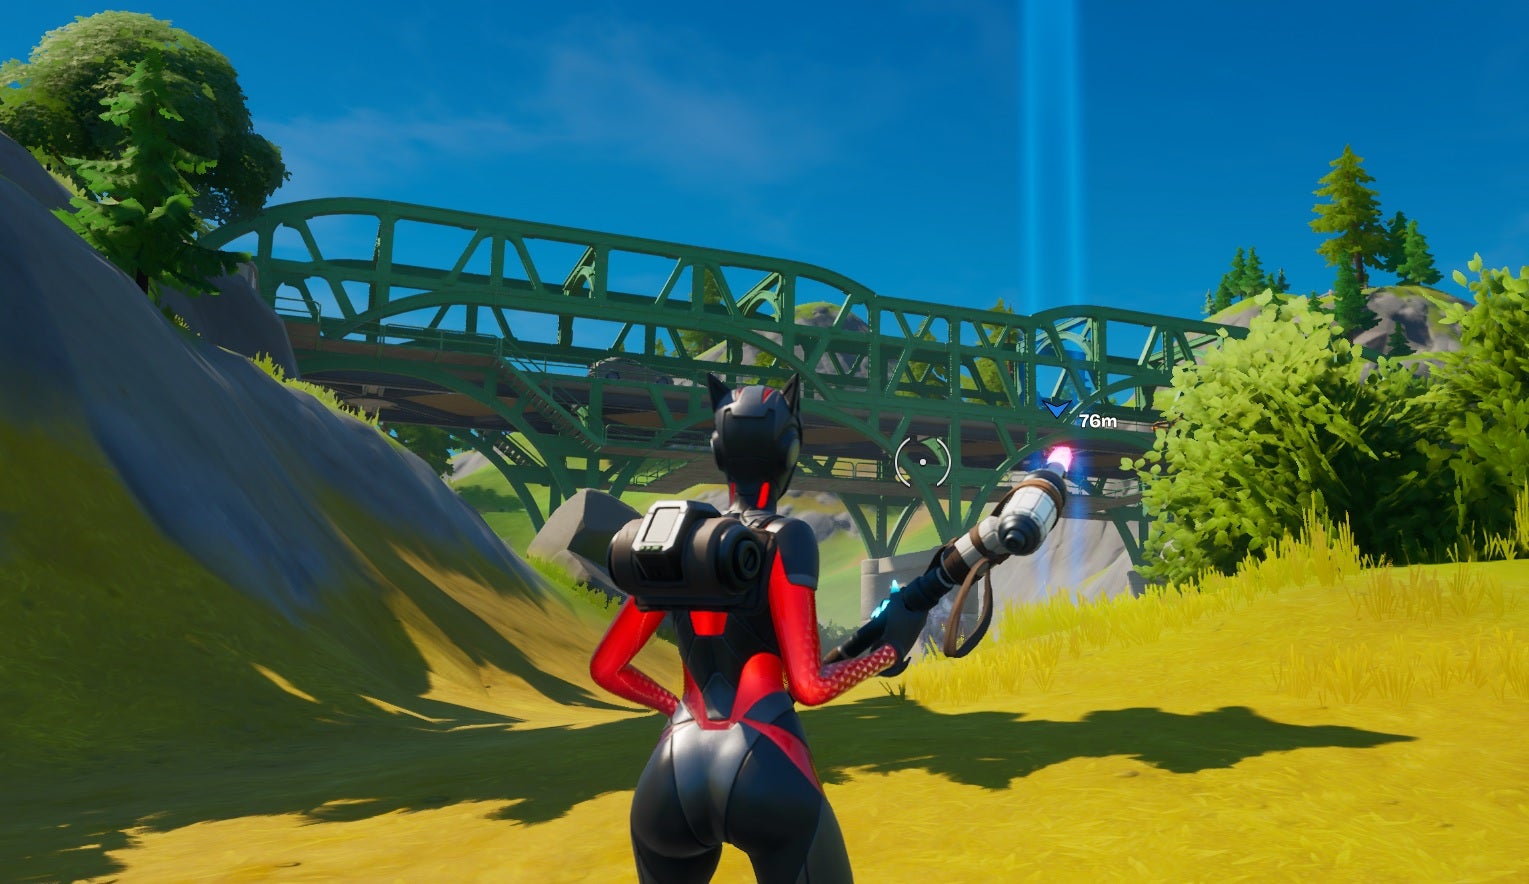 Image for Fortnite: Chapter 2 - Dance at the green, yellow and red steel bridges